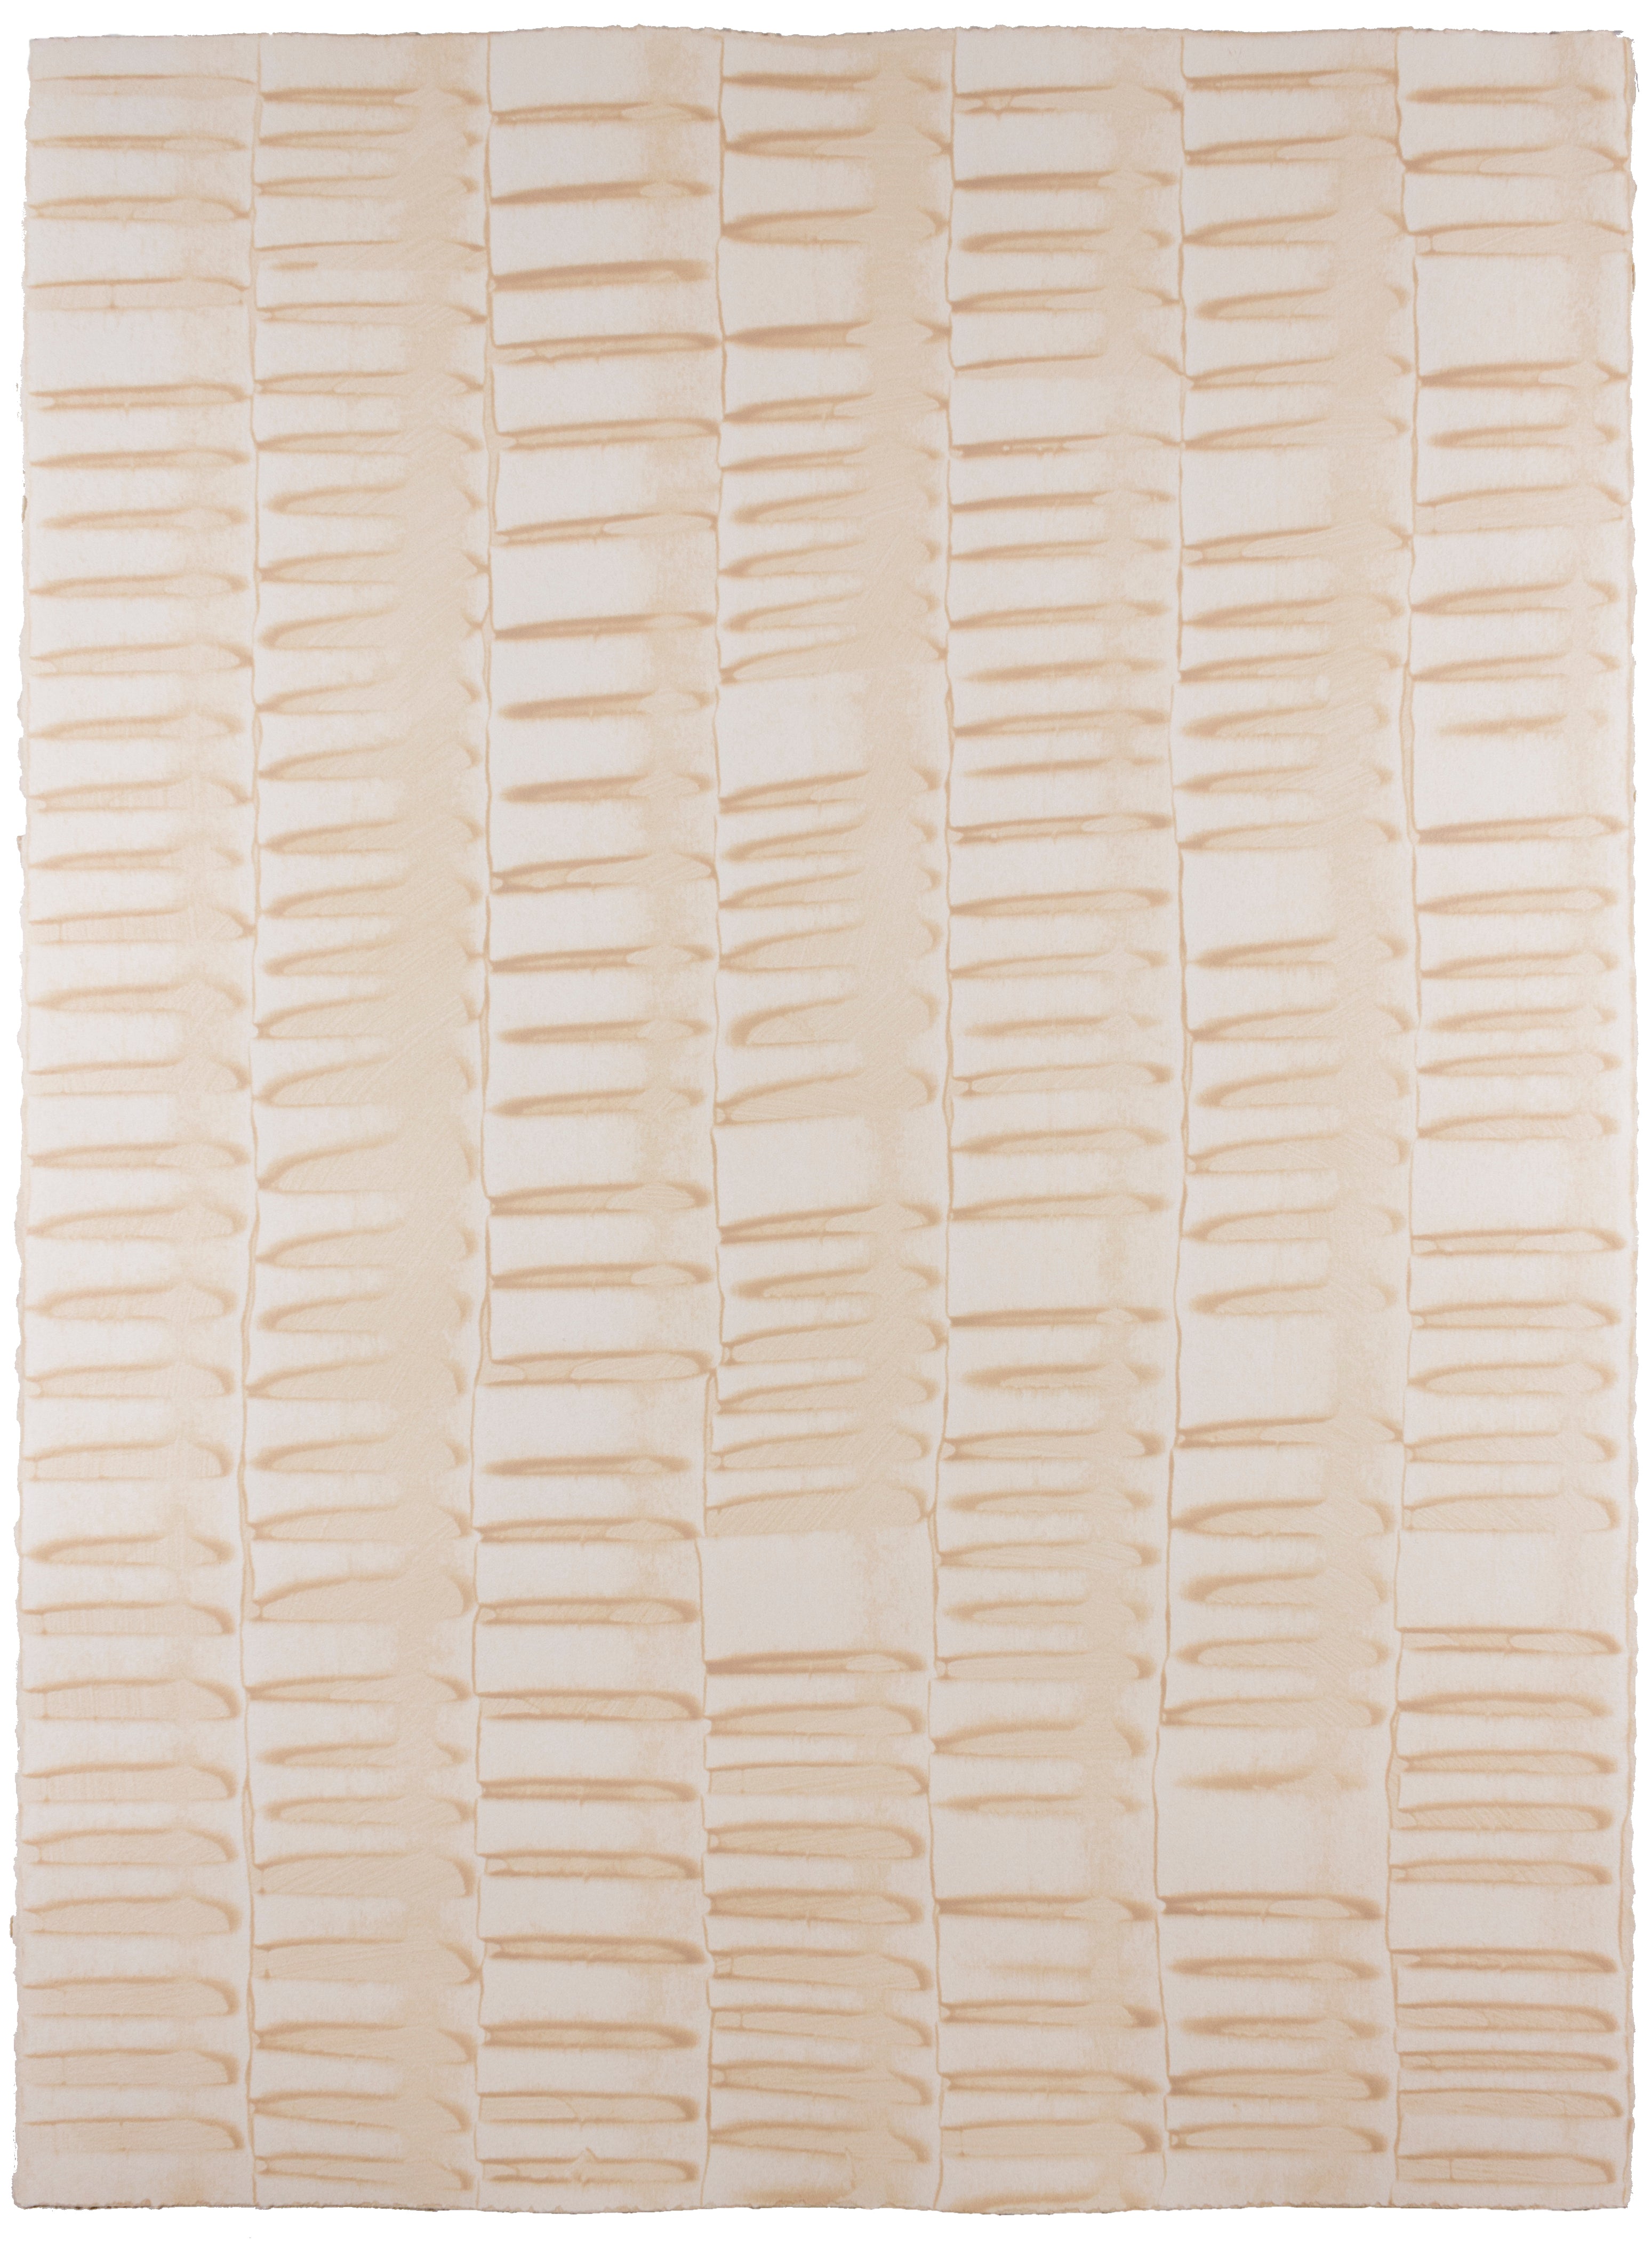 Sheet of hand-painted wallpaper with an undulating ribbon pattern in peach.